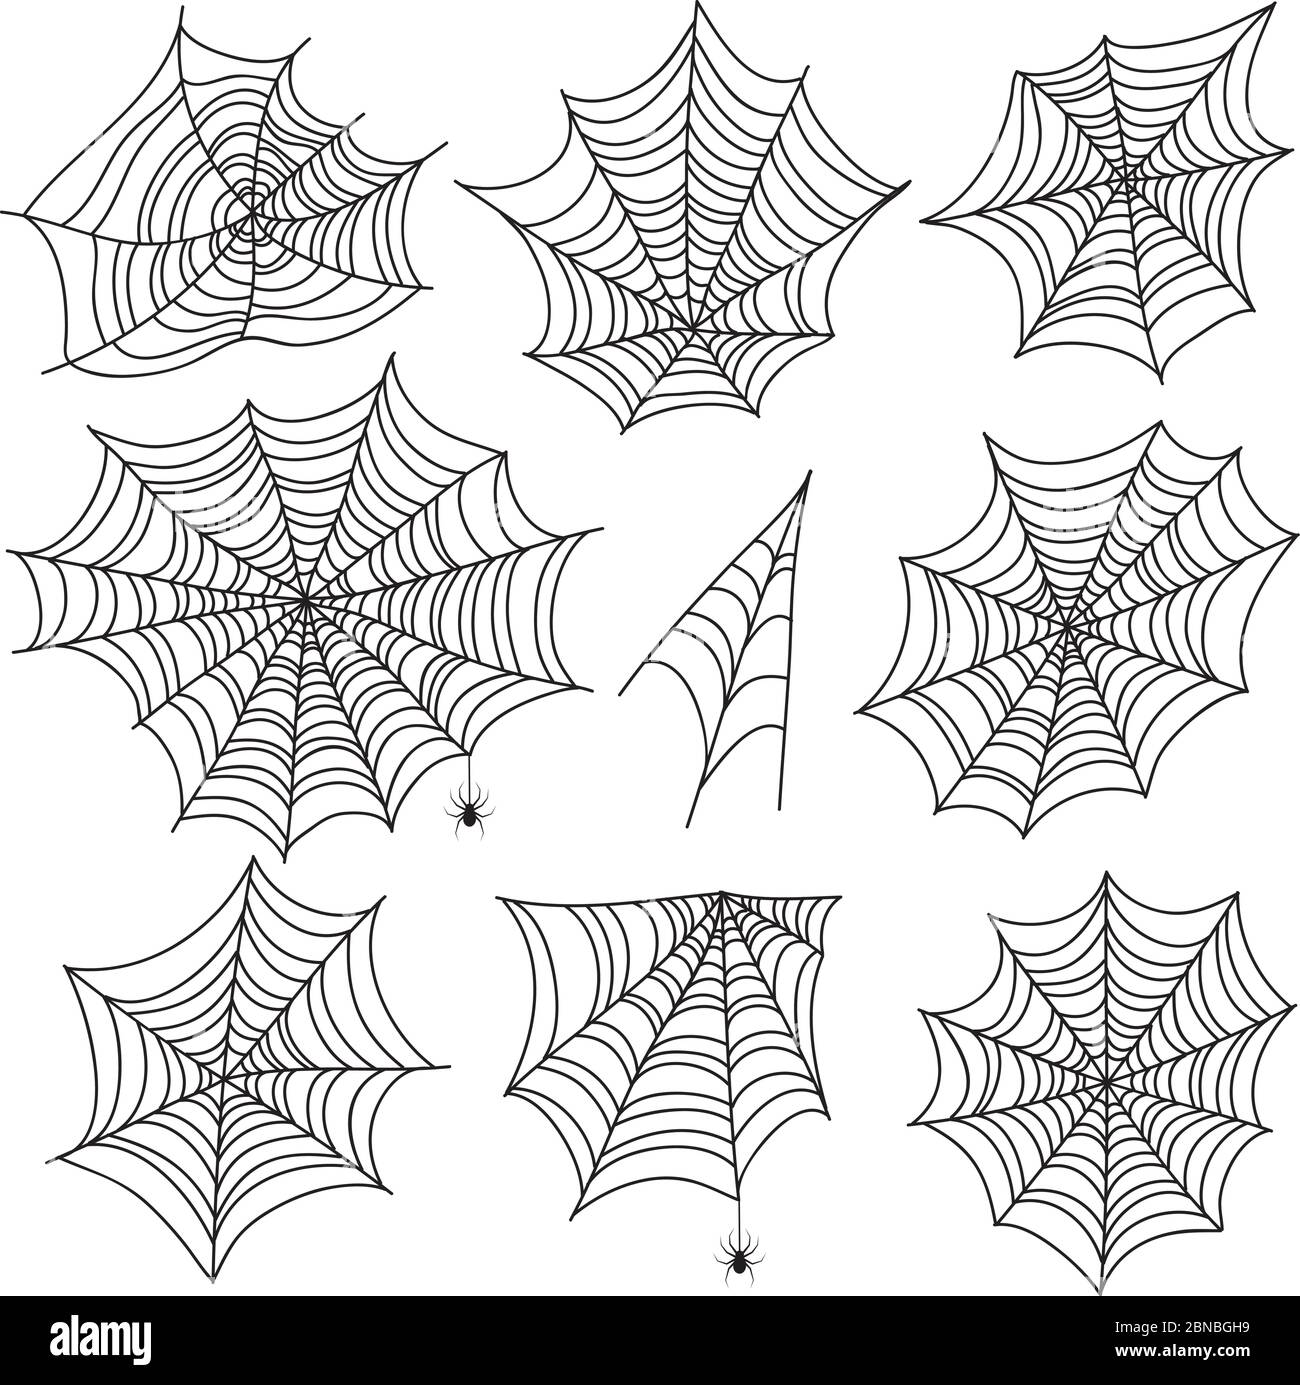 Halloween spiderweb. Black cobweb and spider silhouettes. Scary web vector graphics isolated on white background. Spiderweb silhouette, cobweb halloween illustration Stock Vector